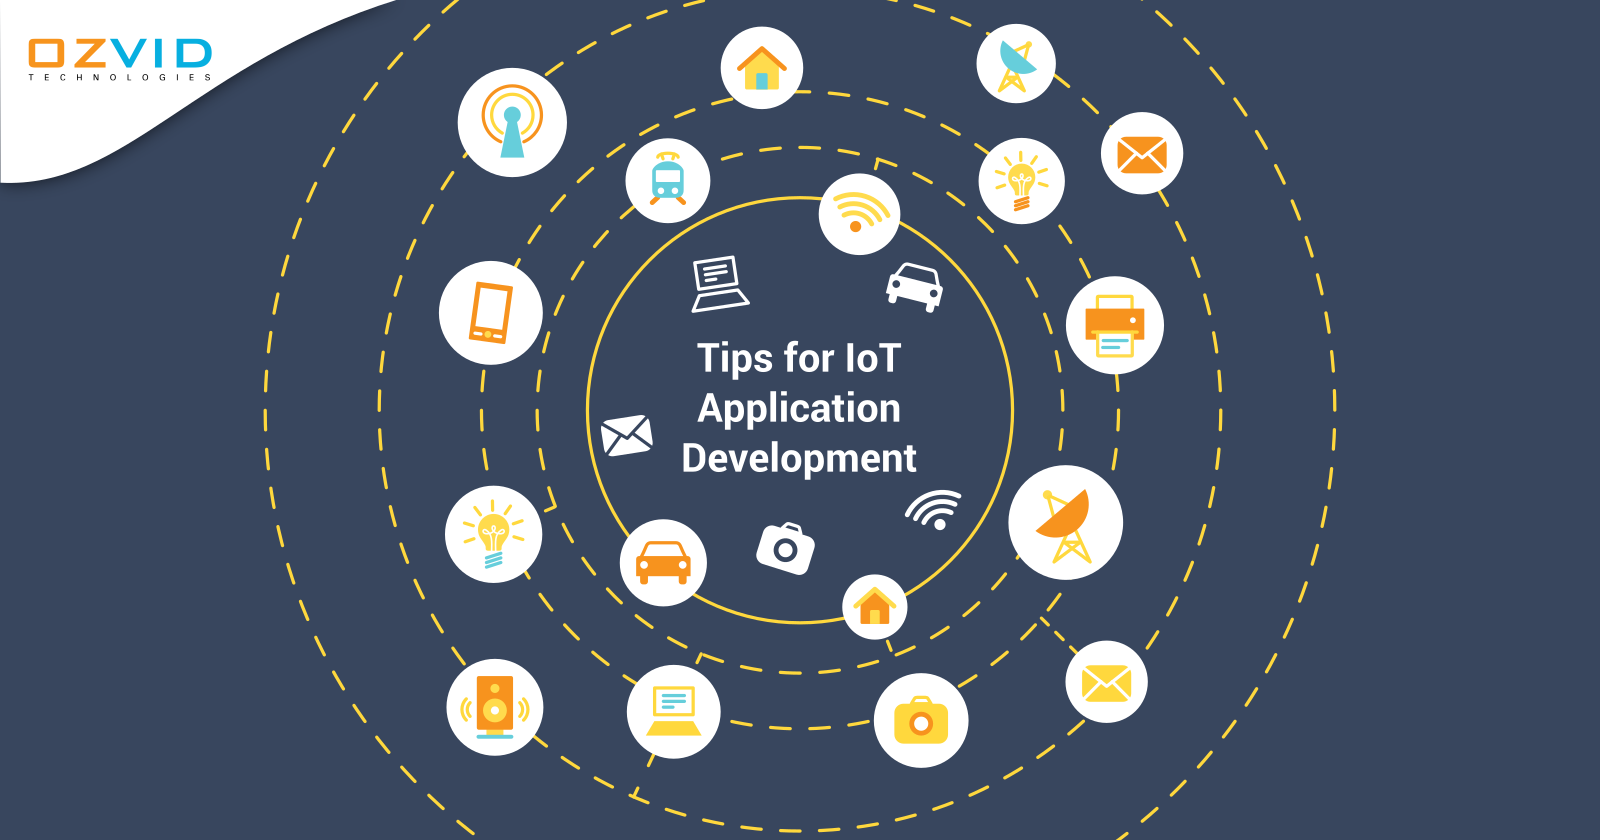 Tips to Consider for Developing IoT Applications